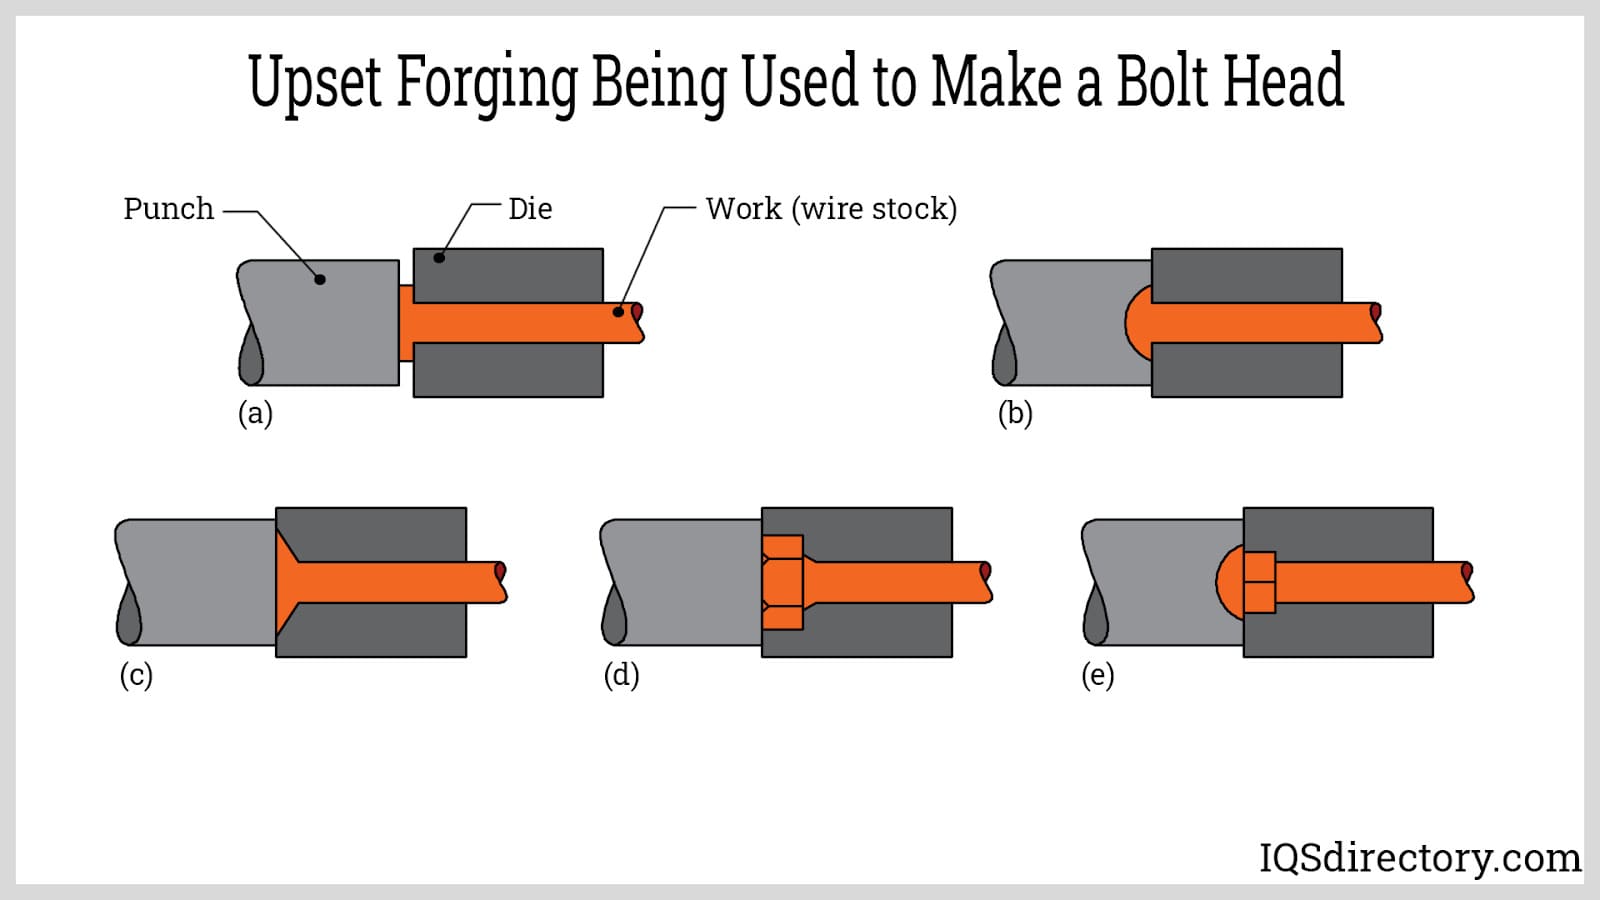 Upset Forging Being Used to Make a Bolt Head